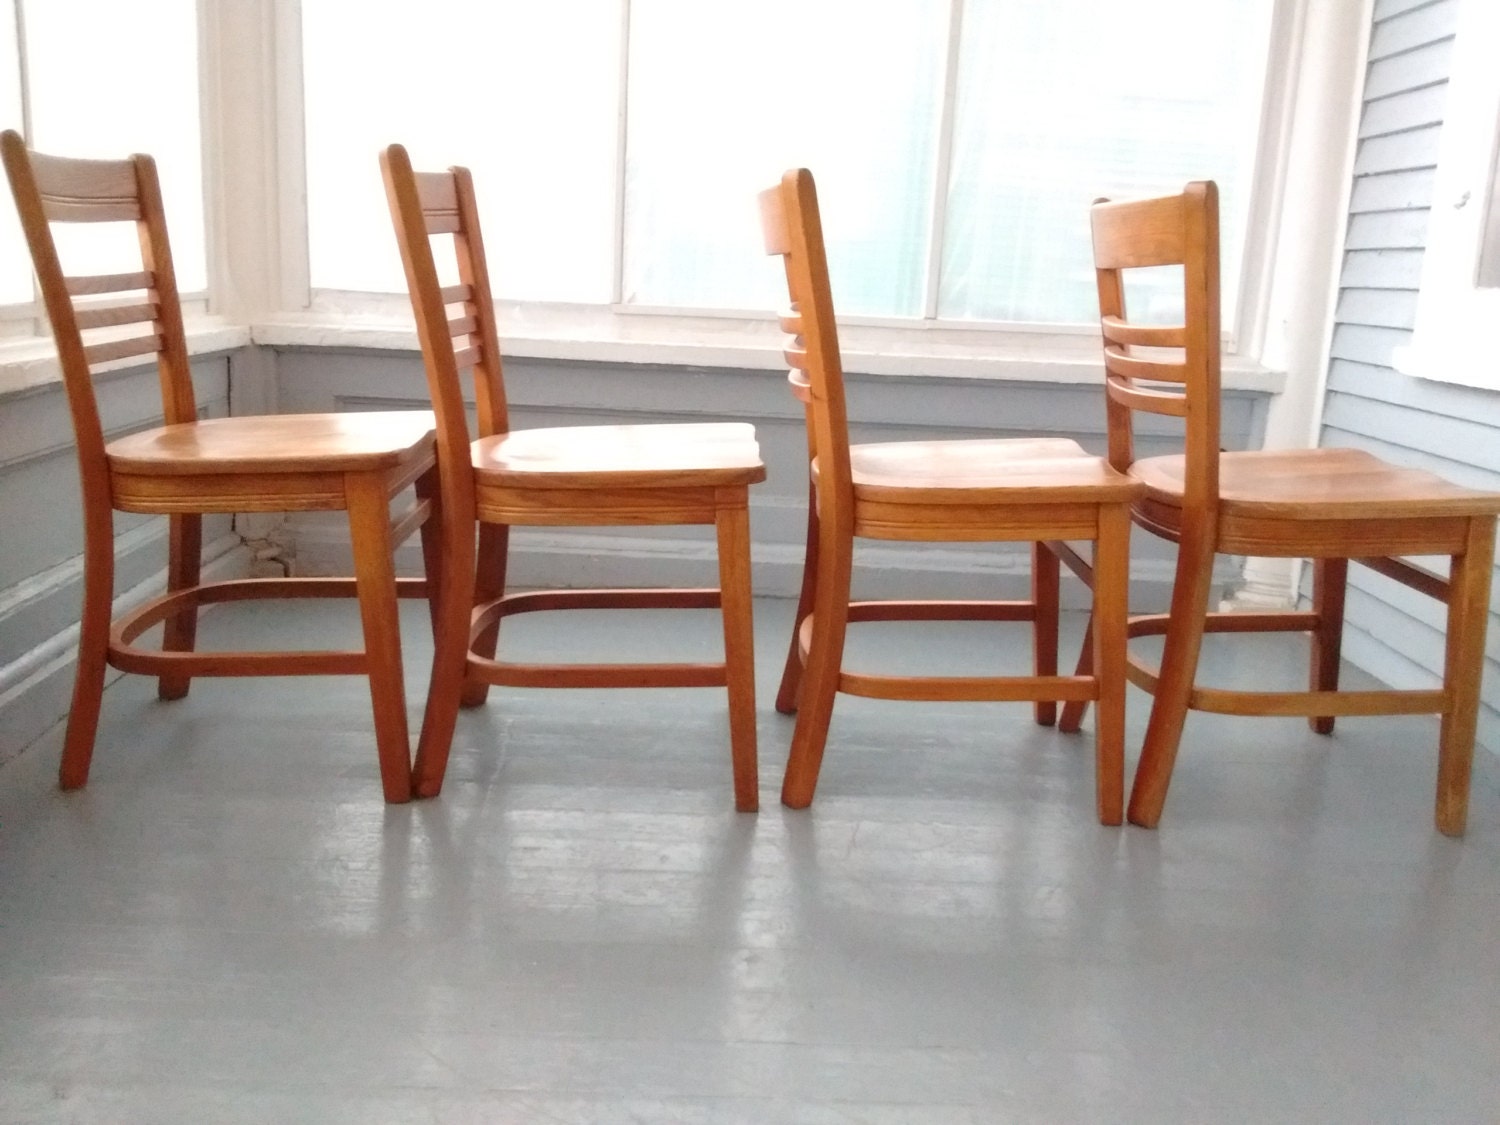 four wooden dining room chairs